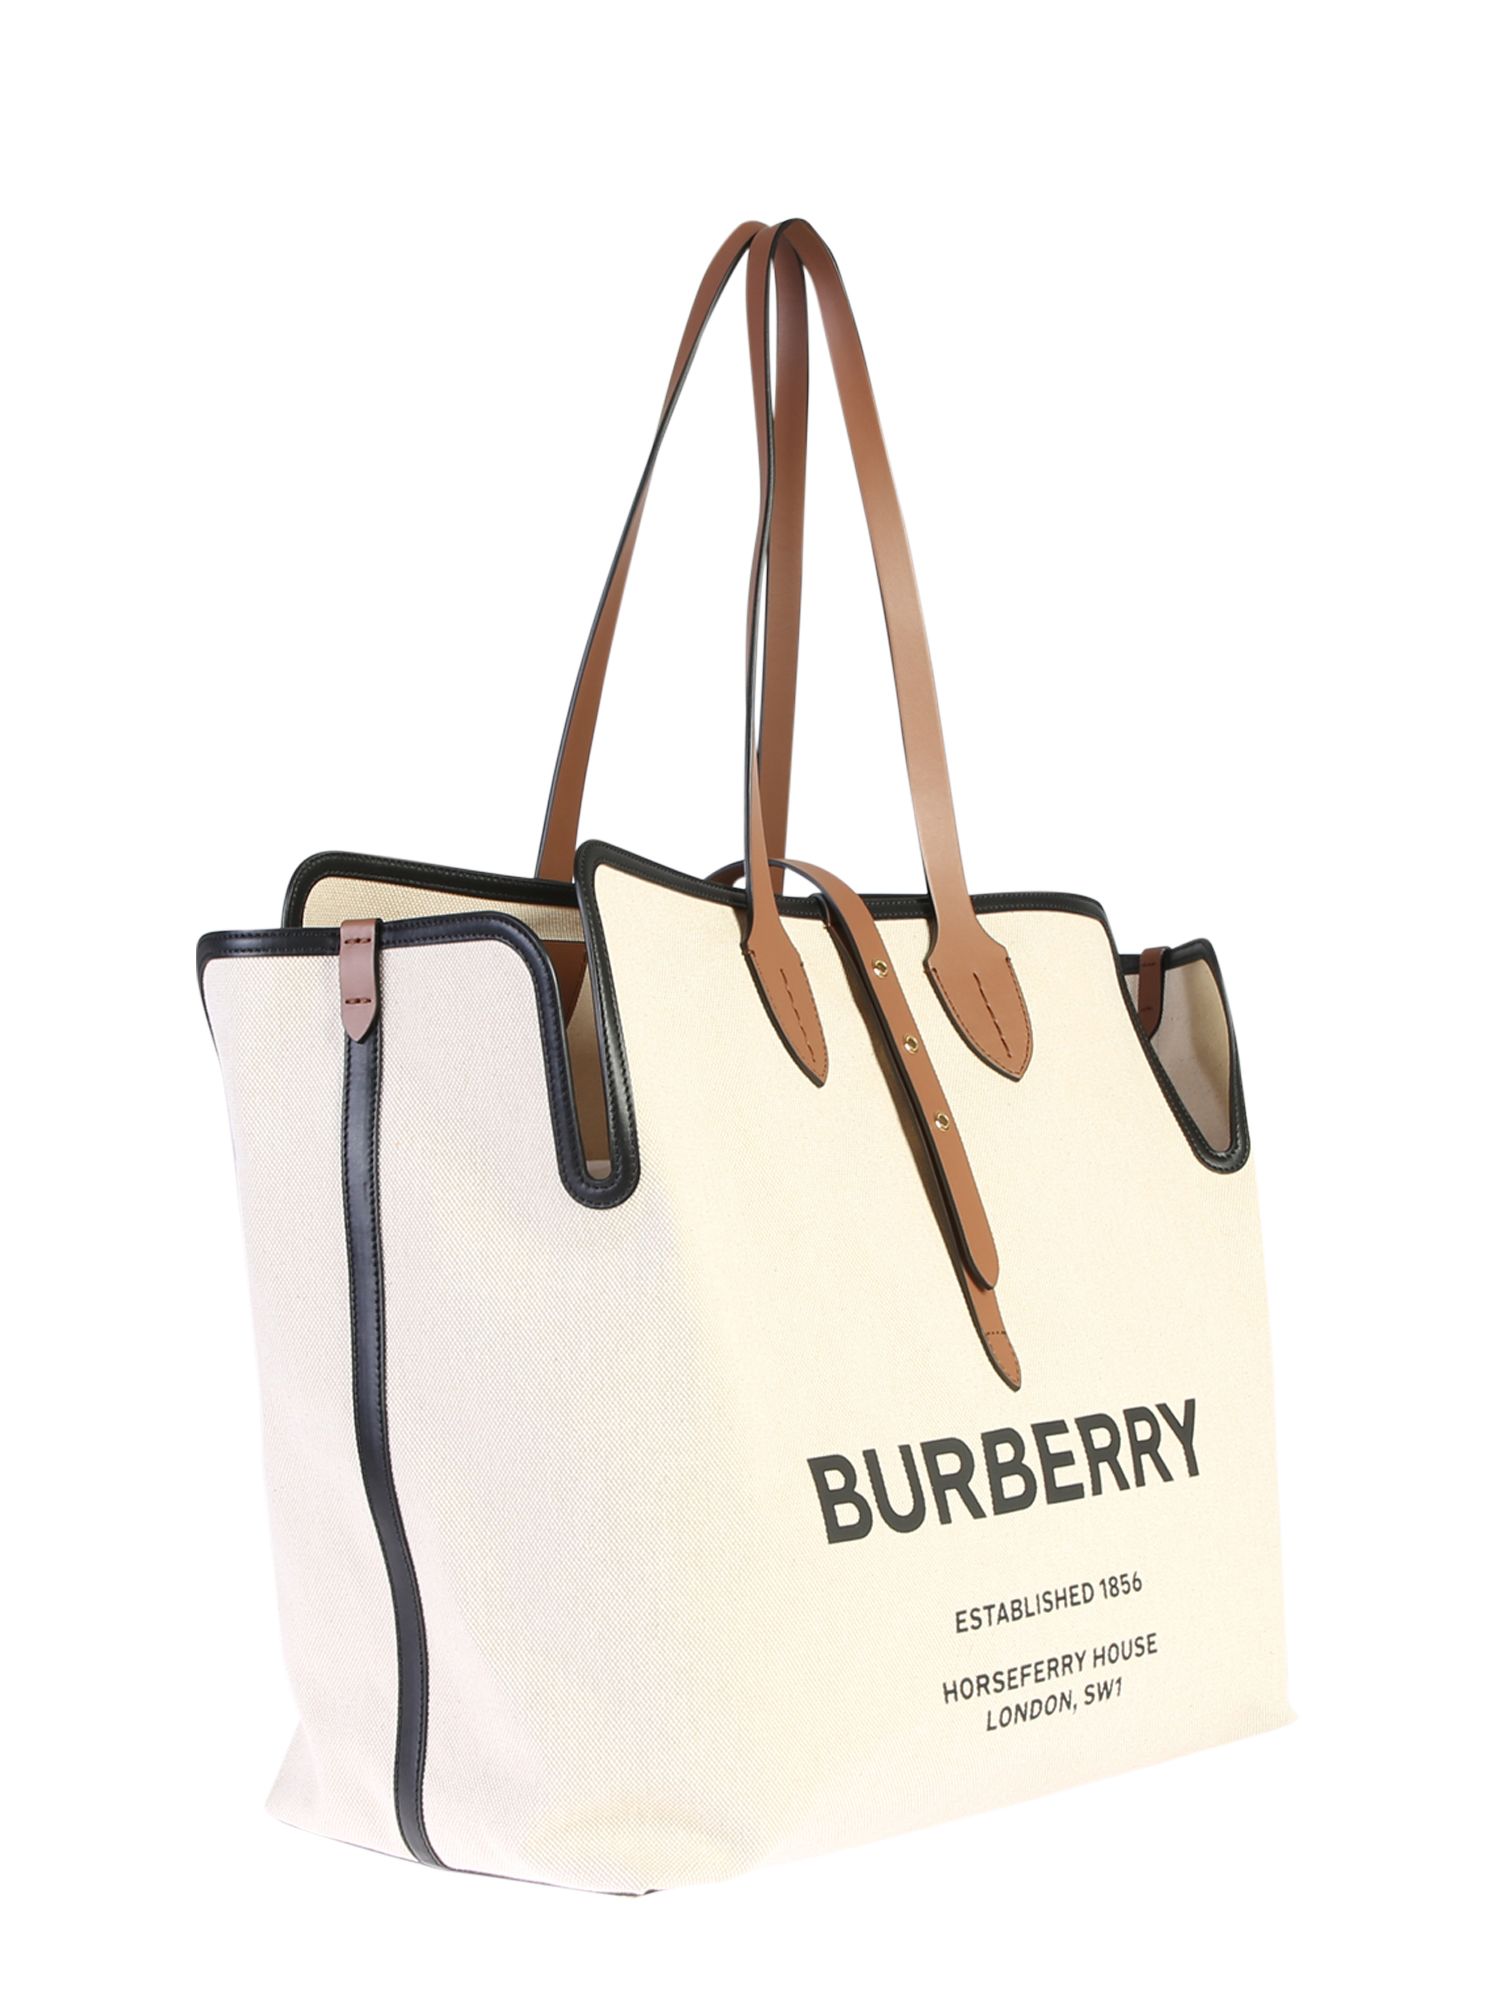 Burberry Burberry Large Tote Bag - White - 10972120 | italist